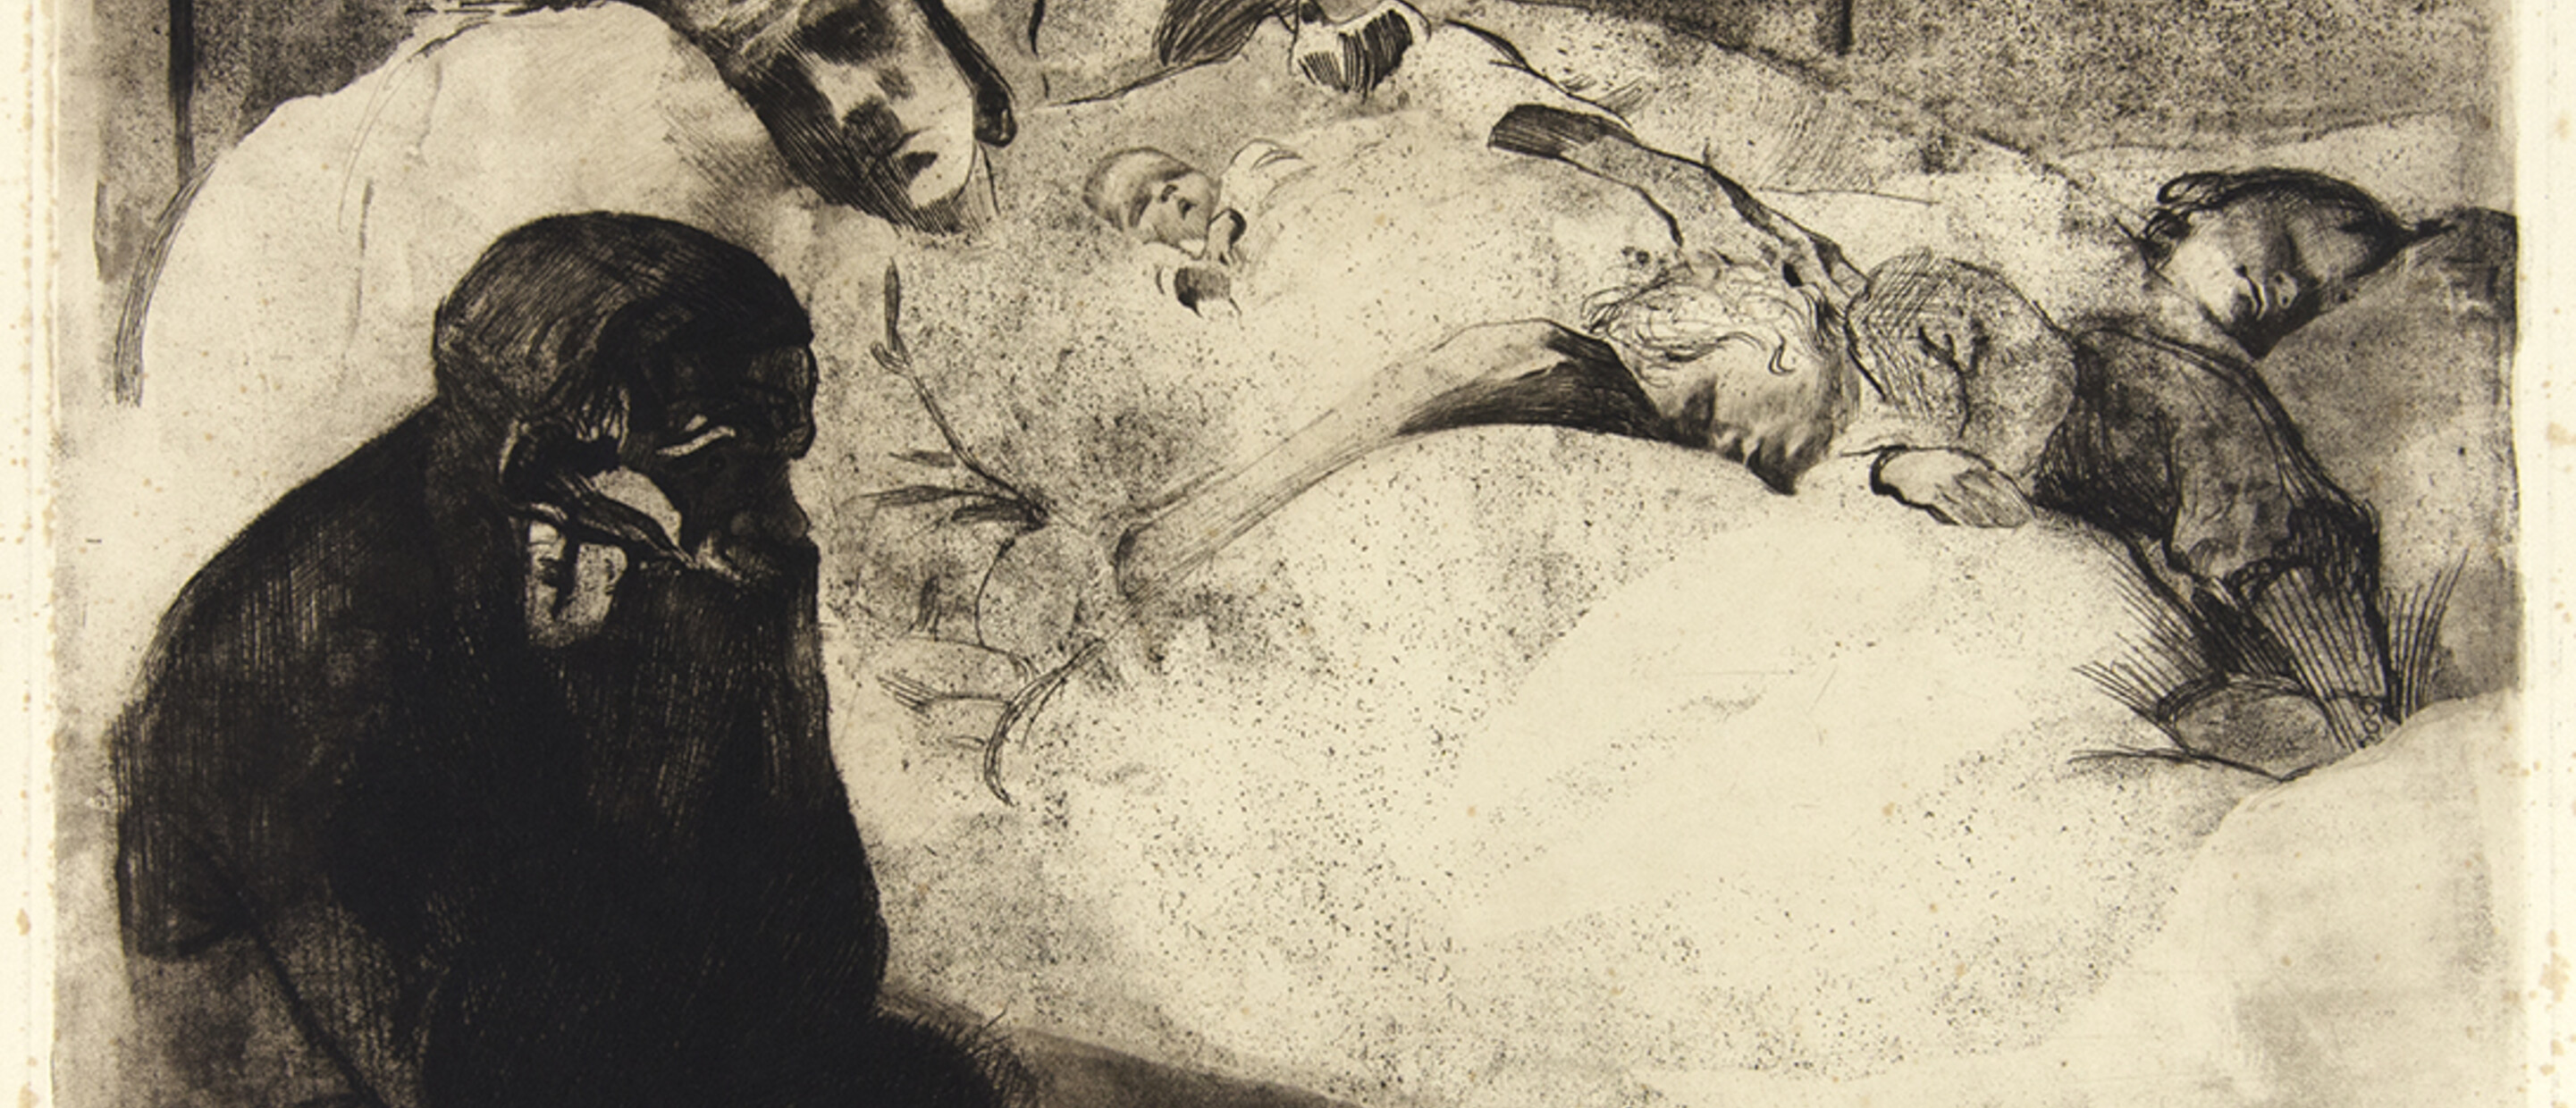 Käthe Kollwitz, Arbeitslosigkeit (Umemployment), 1909, 15 3/4 x 21 in. Etching on paper. Pomona College Collection. Gift of the Culley Collection